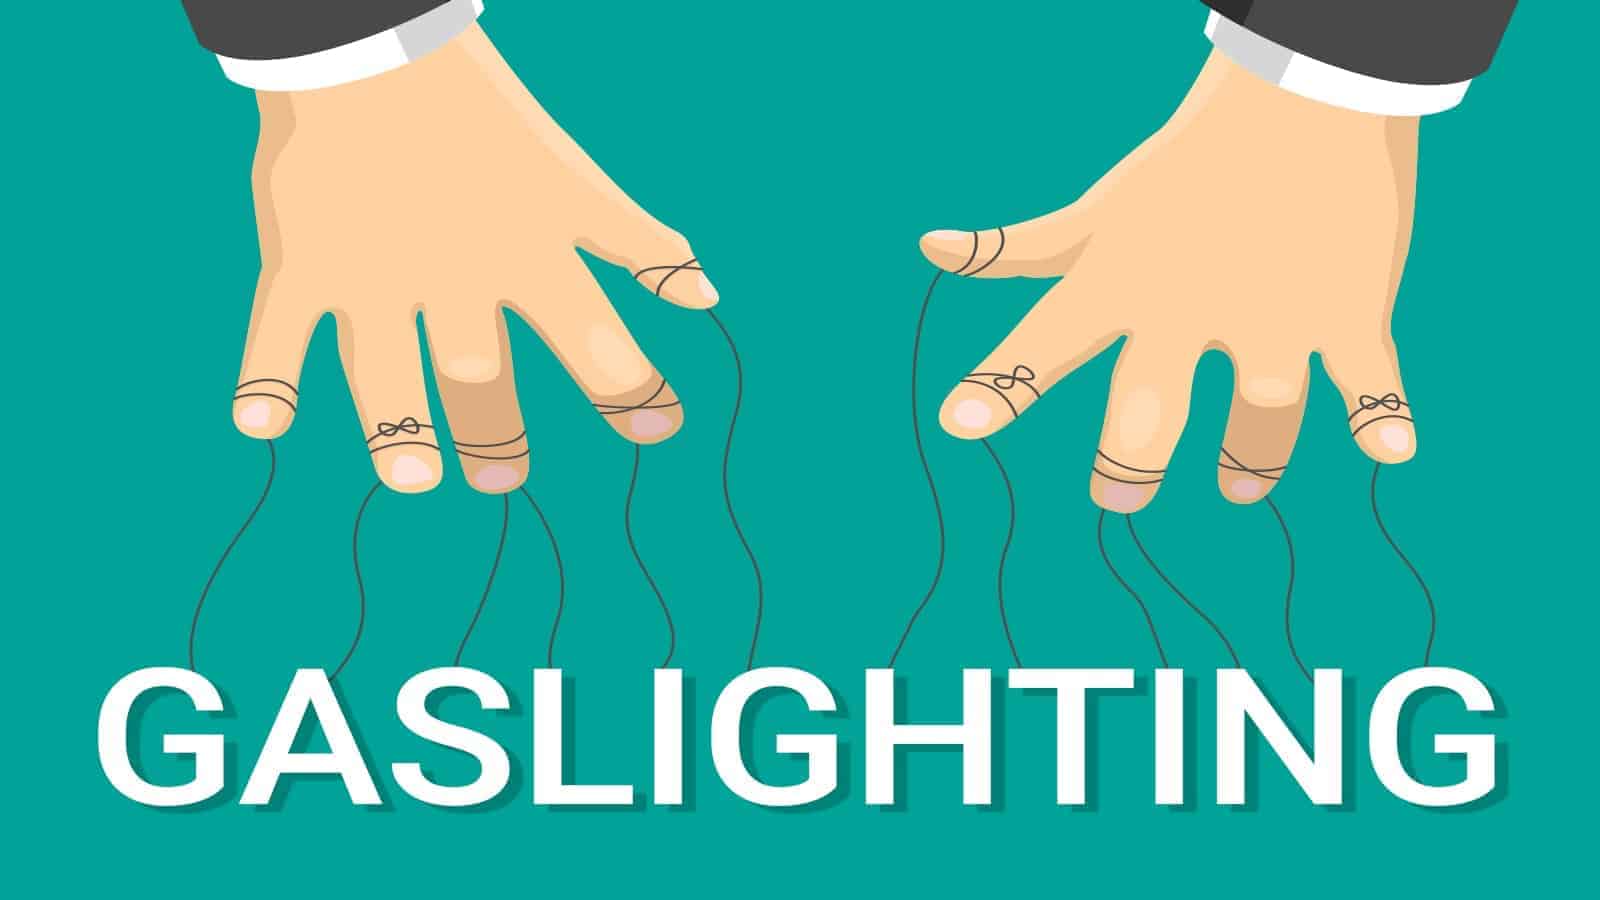 10 Warning Signs Of Gaslighting To Never Ignore